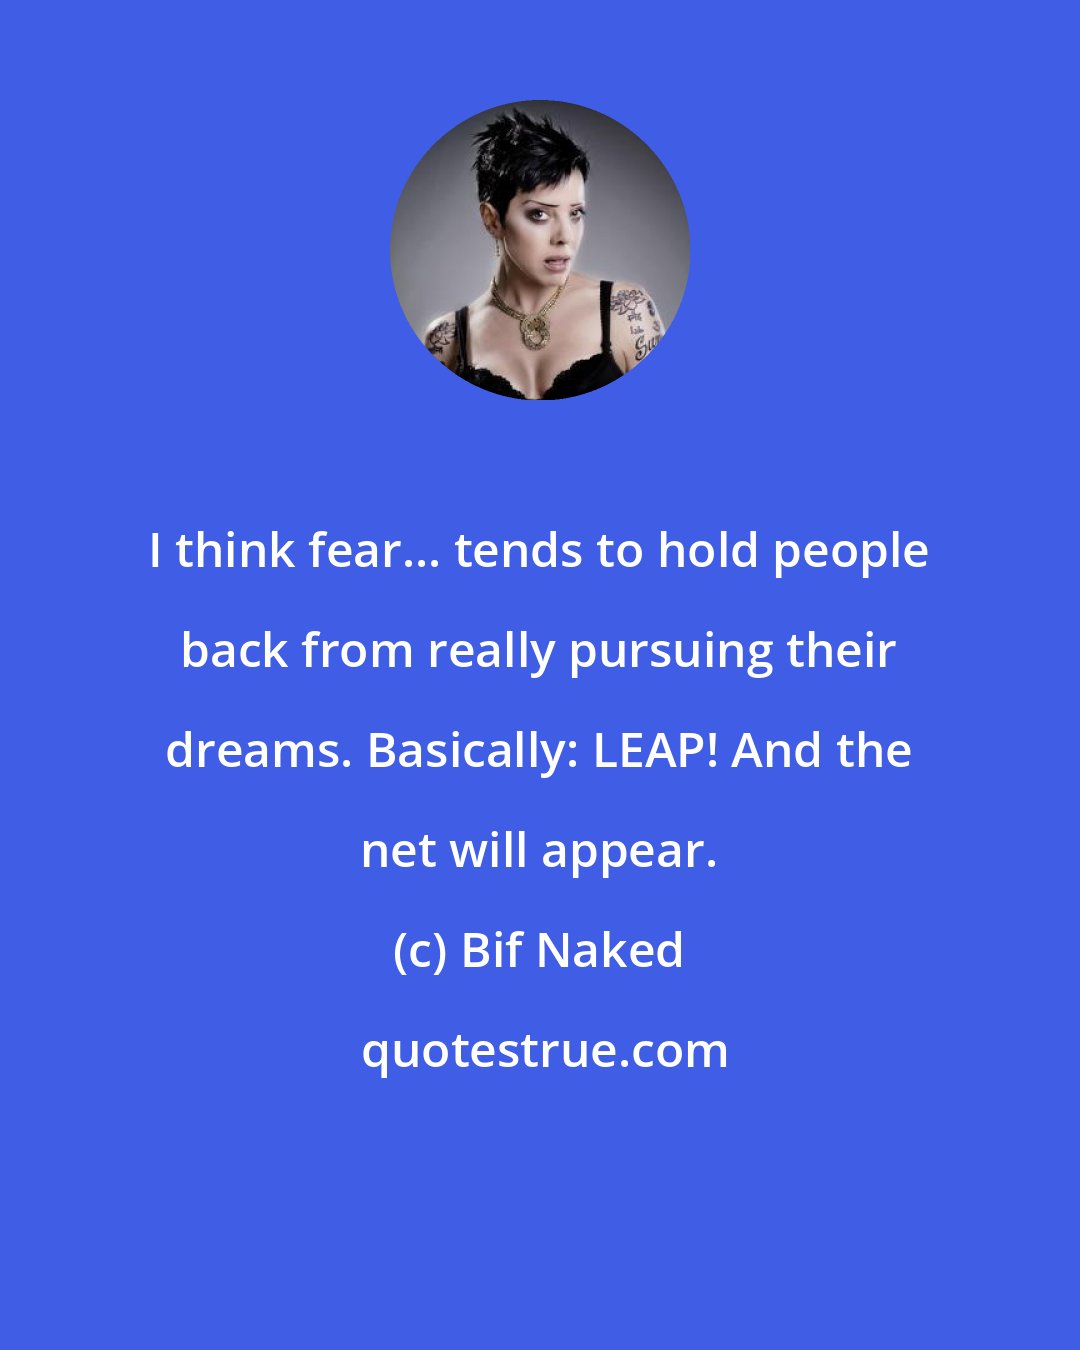 Bif Naked: I think fear... tends to hold people back from really pursuing their dreams. Basically: LEAP! And the net will appear.